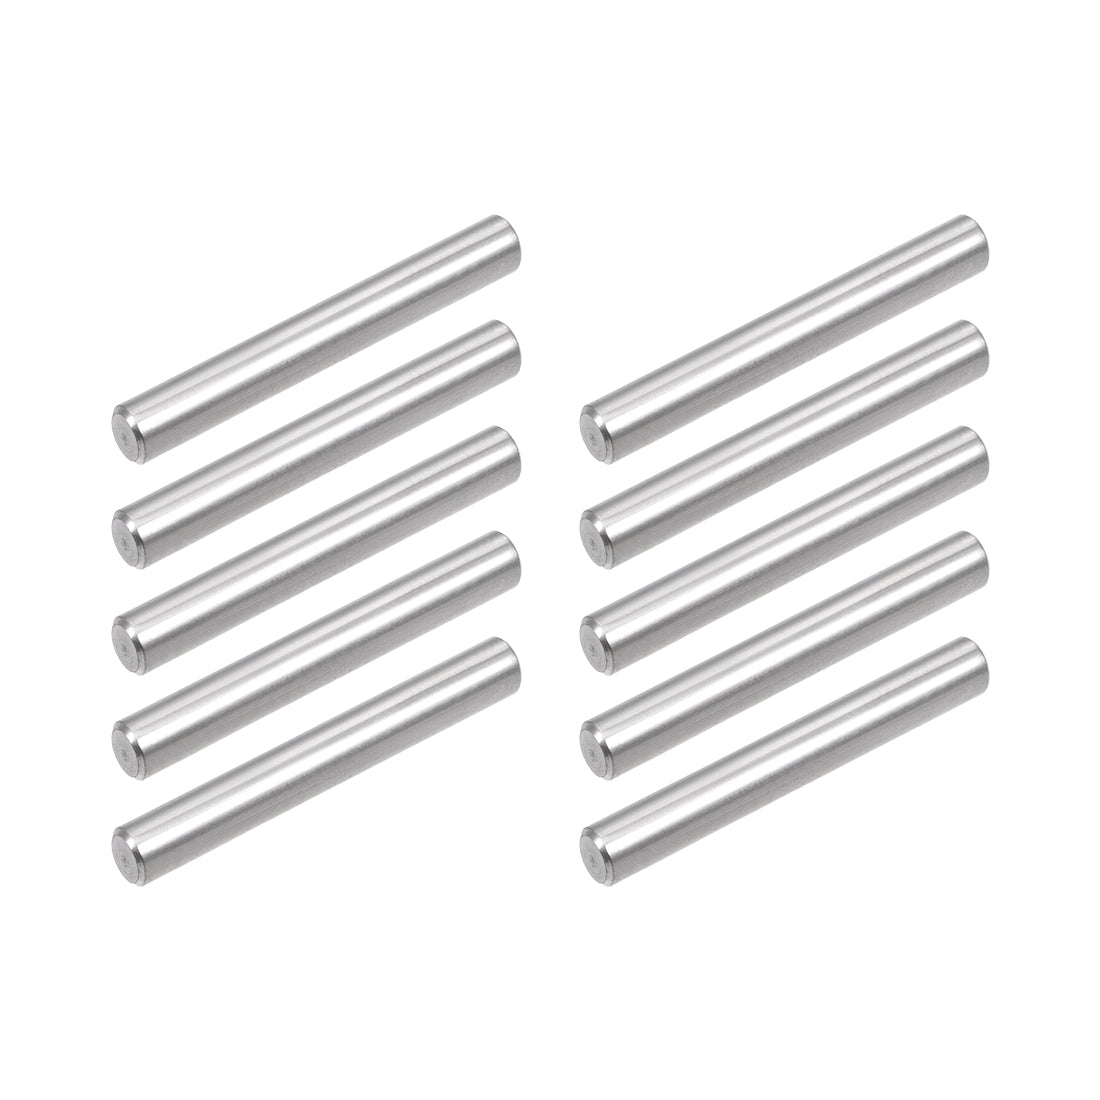 uxcell Uxcell 10Pcs 5mm x 30mm Dowel Pin 304 Stainless Steel Shelf Support Pin Fasten Elements Silver Tone